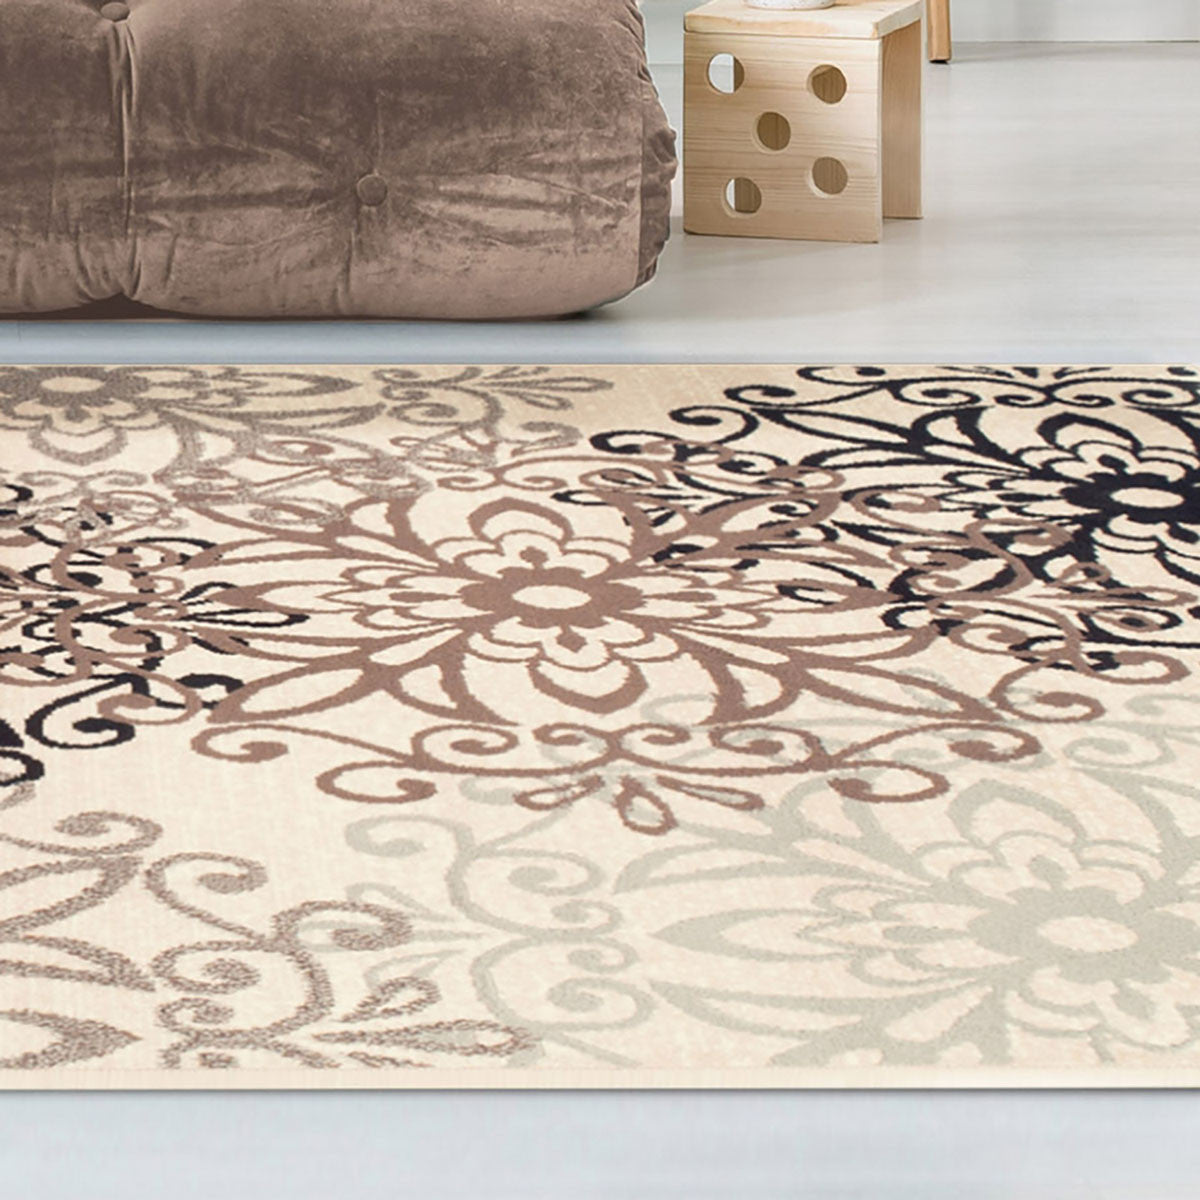 5' X 8' Tan Gray And Black Floral Medallion Stain Resistant Area Rug